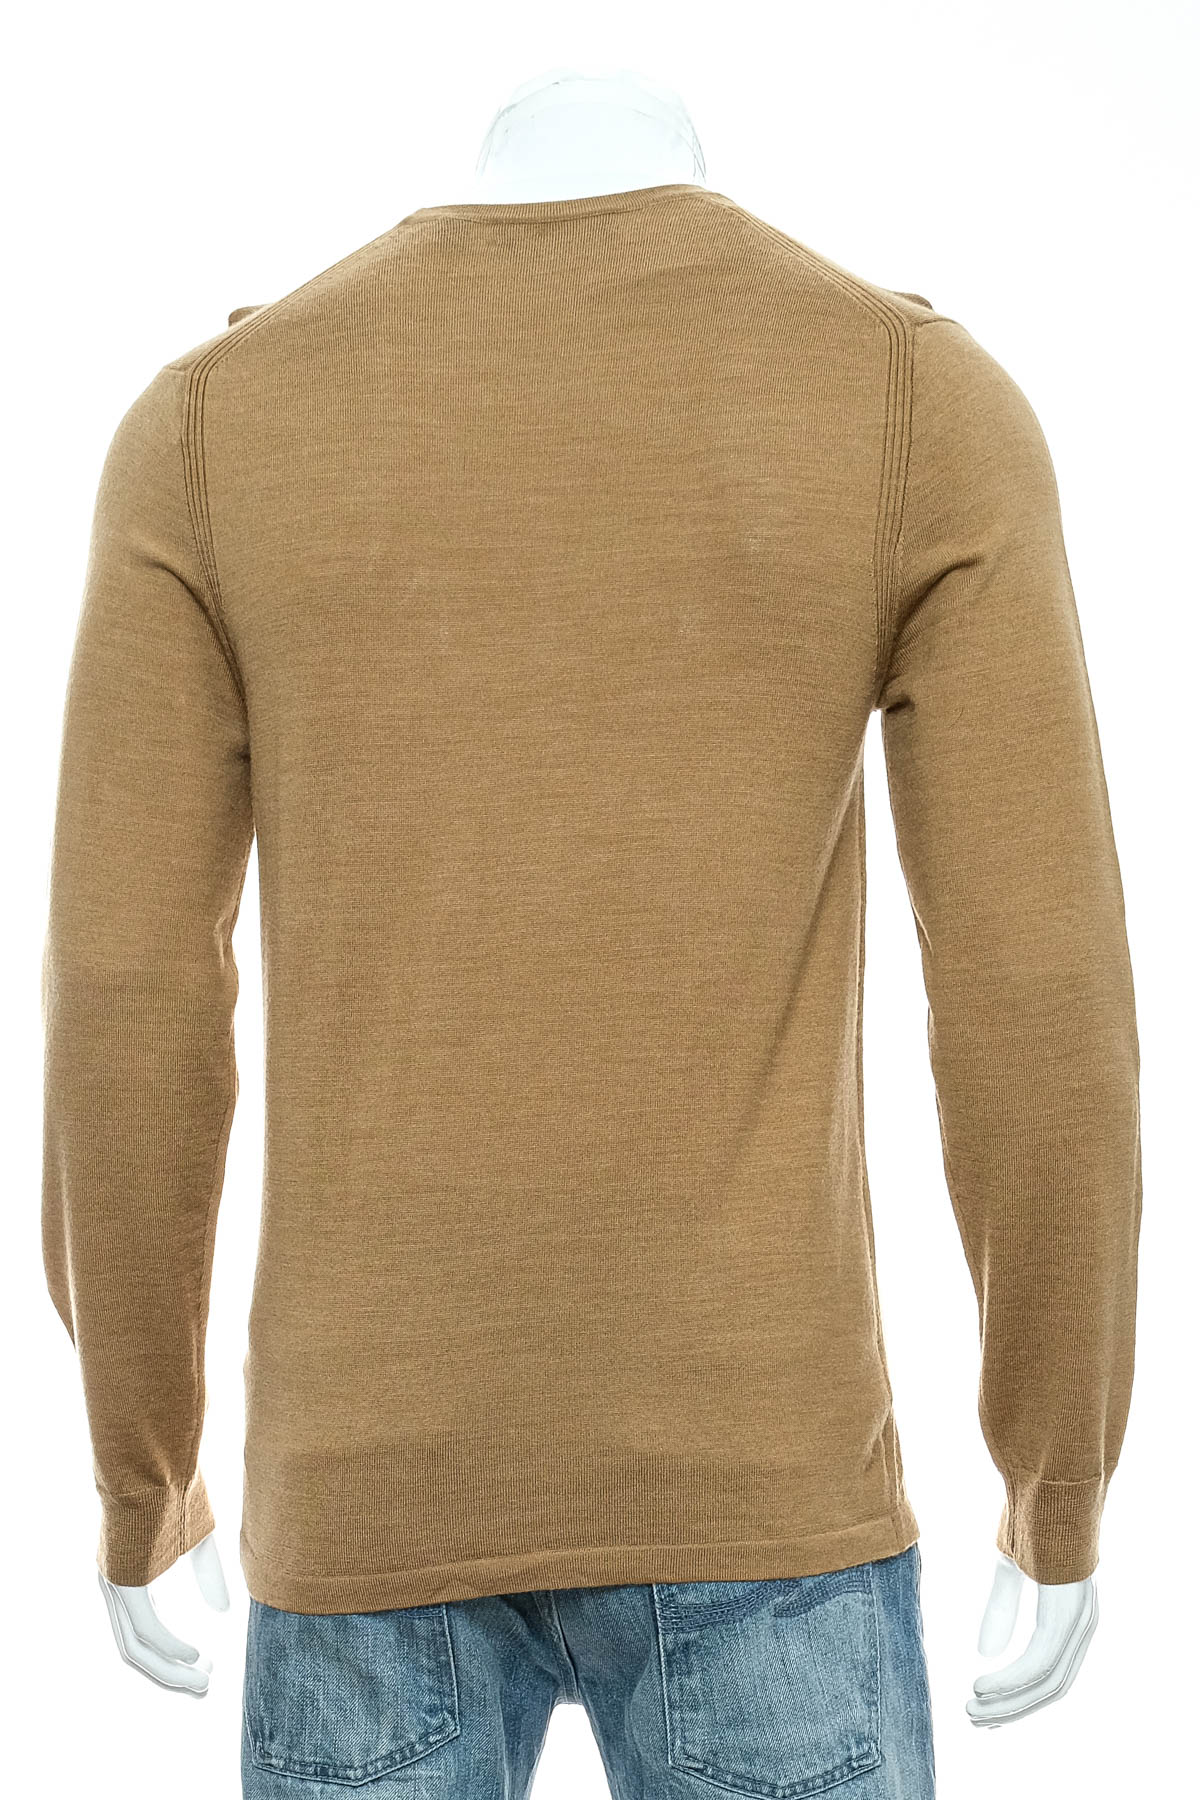 Men's sweater - COUNTRY ROAD - 1